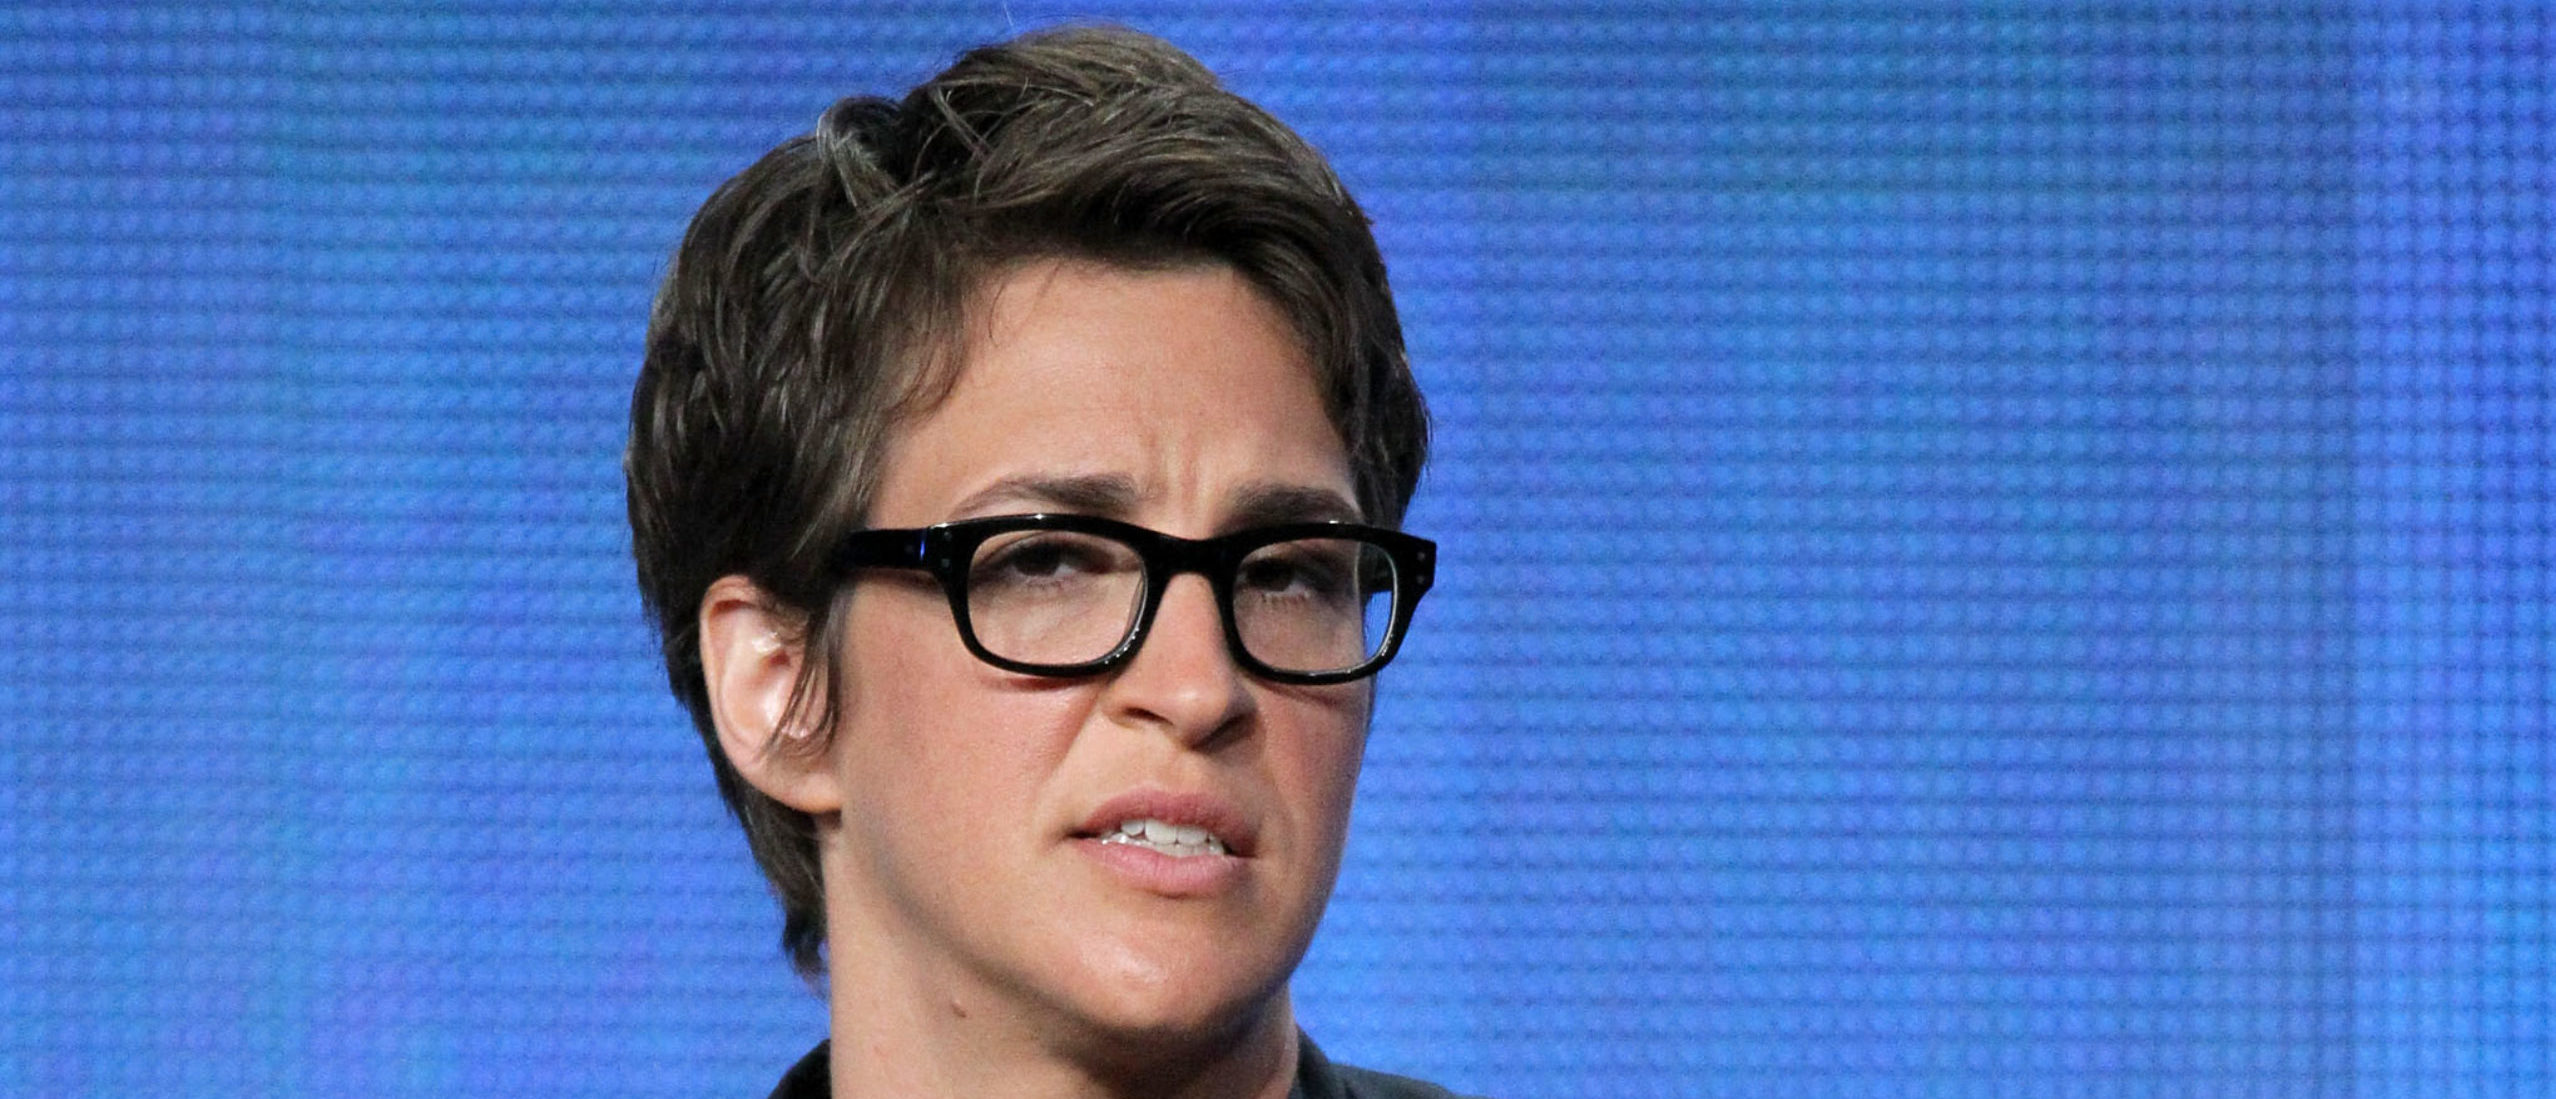 BEVERLY HILLS, CA - AUGUST 02: Rachel Maddow host of 'The Rachel Maddow Show' speaks during the 'MSNBC' panel during the NBC Universal portion of the 2011 Summer TCA Tour held at the Beverly Hilton Hotel on August 2, 2011 in Beverly Hills, California. (Photo by Frederick M. Brown/Getty Images)